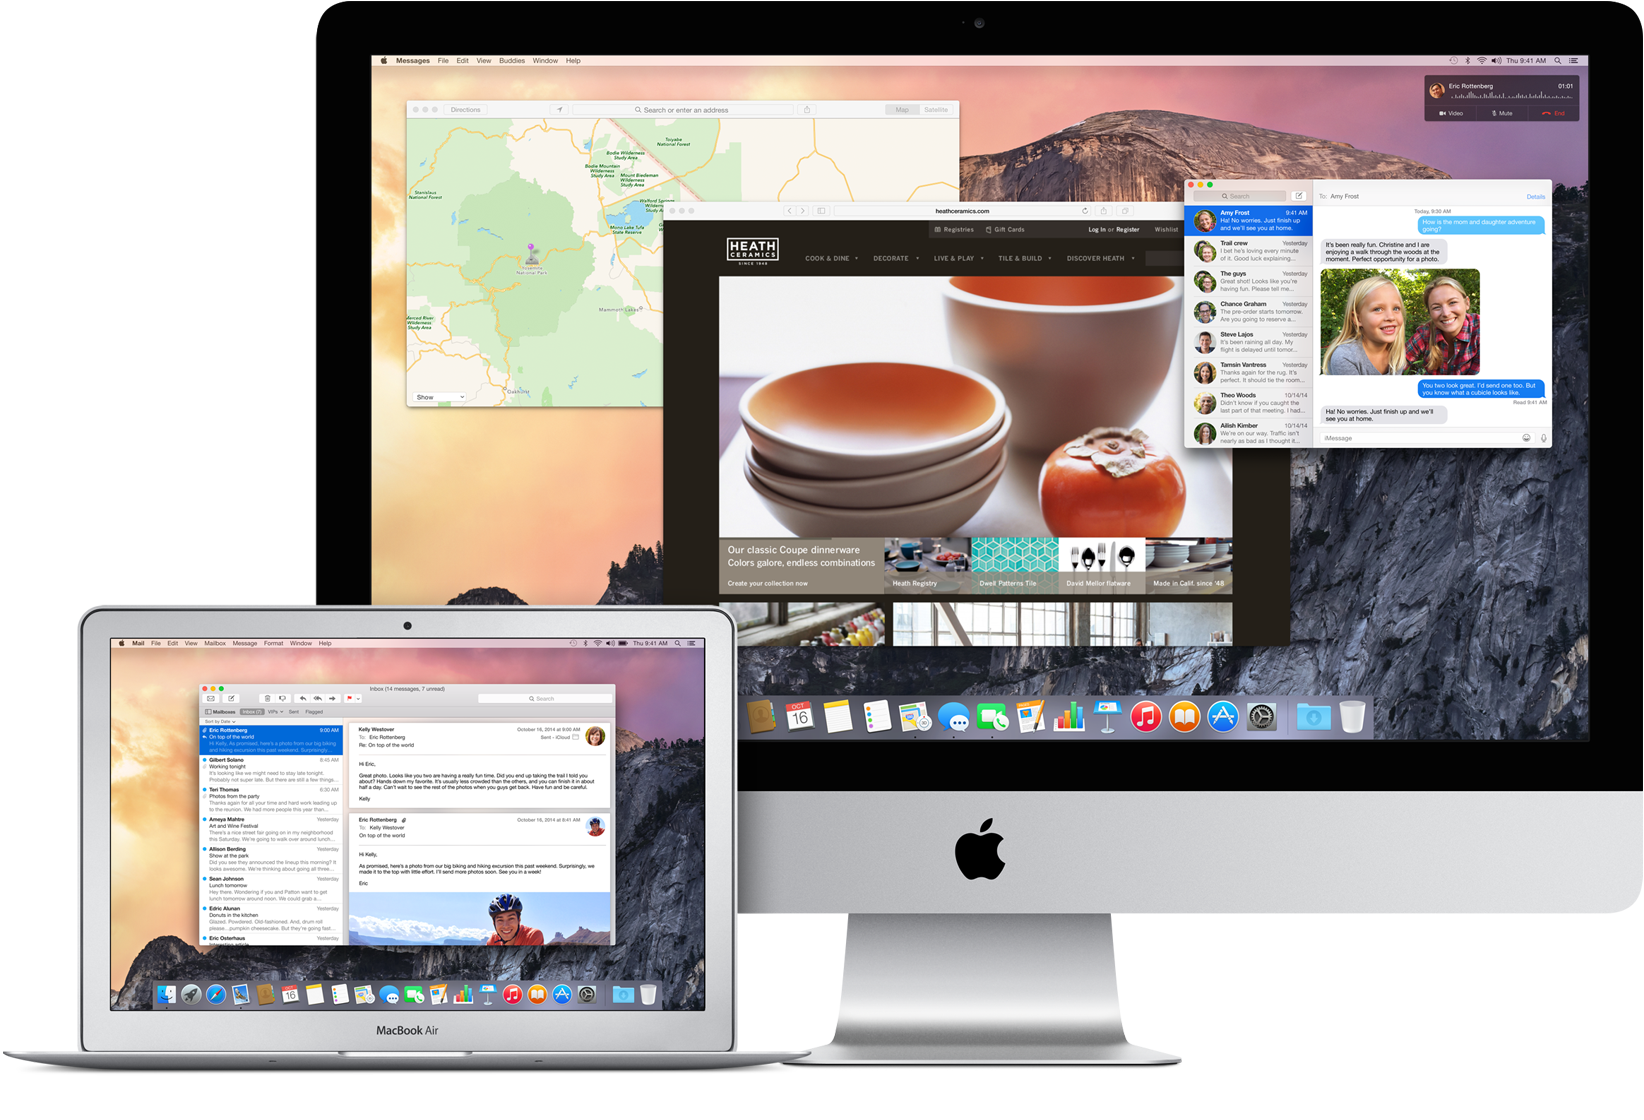 One more: Apple releases sixth beta version of OS X Yosemite 10.10.4